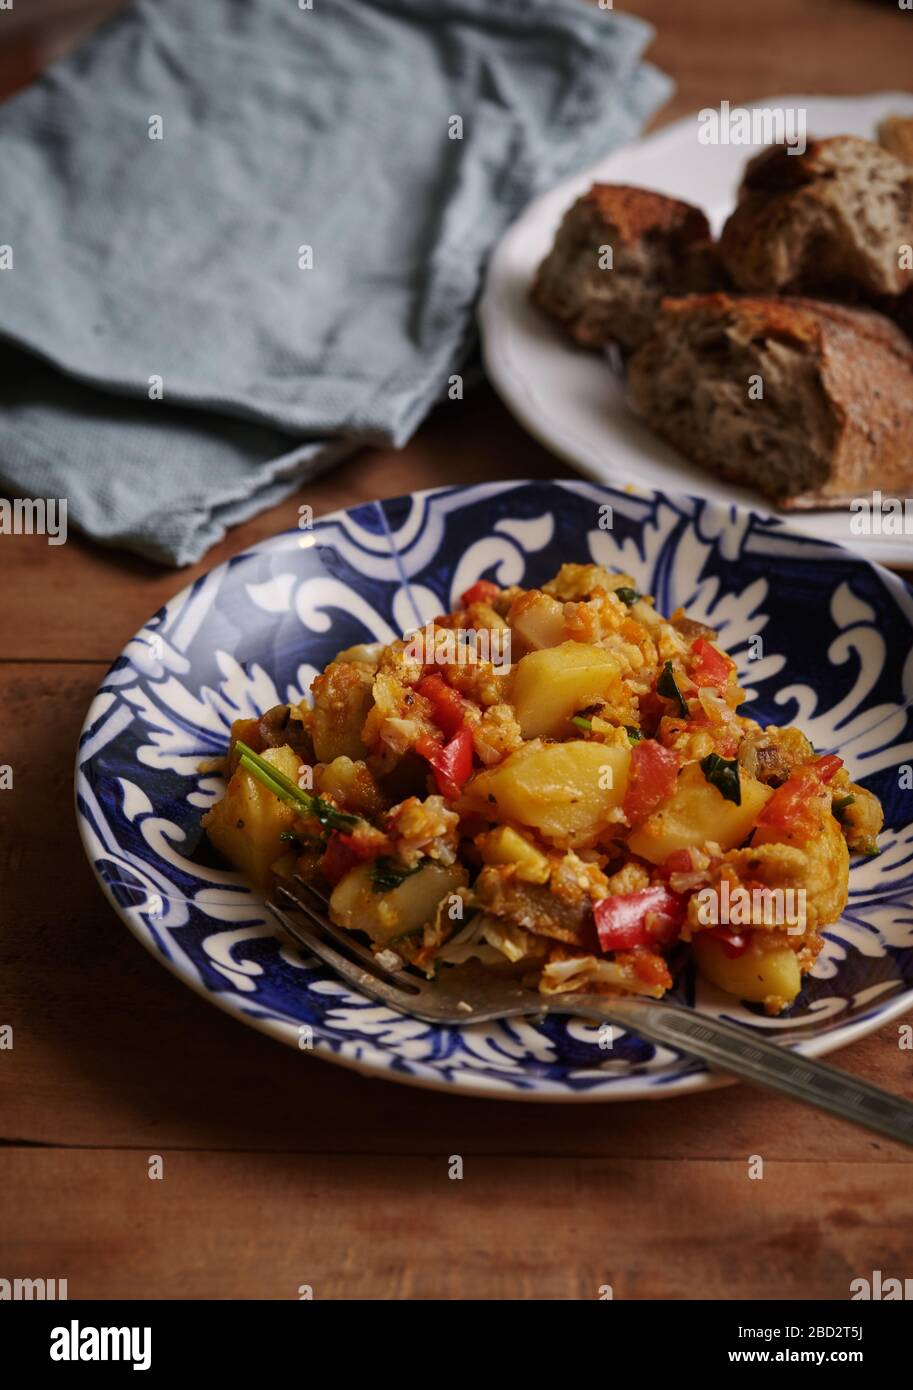 Delicious stew of potatoes, peppers, cauliflower, carrots, onions and green parsley. Stock Photo